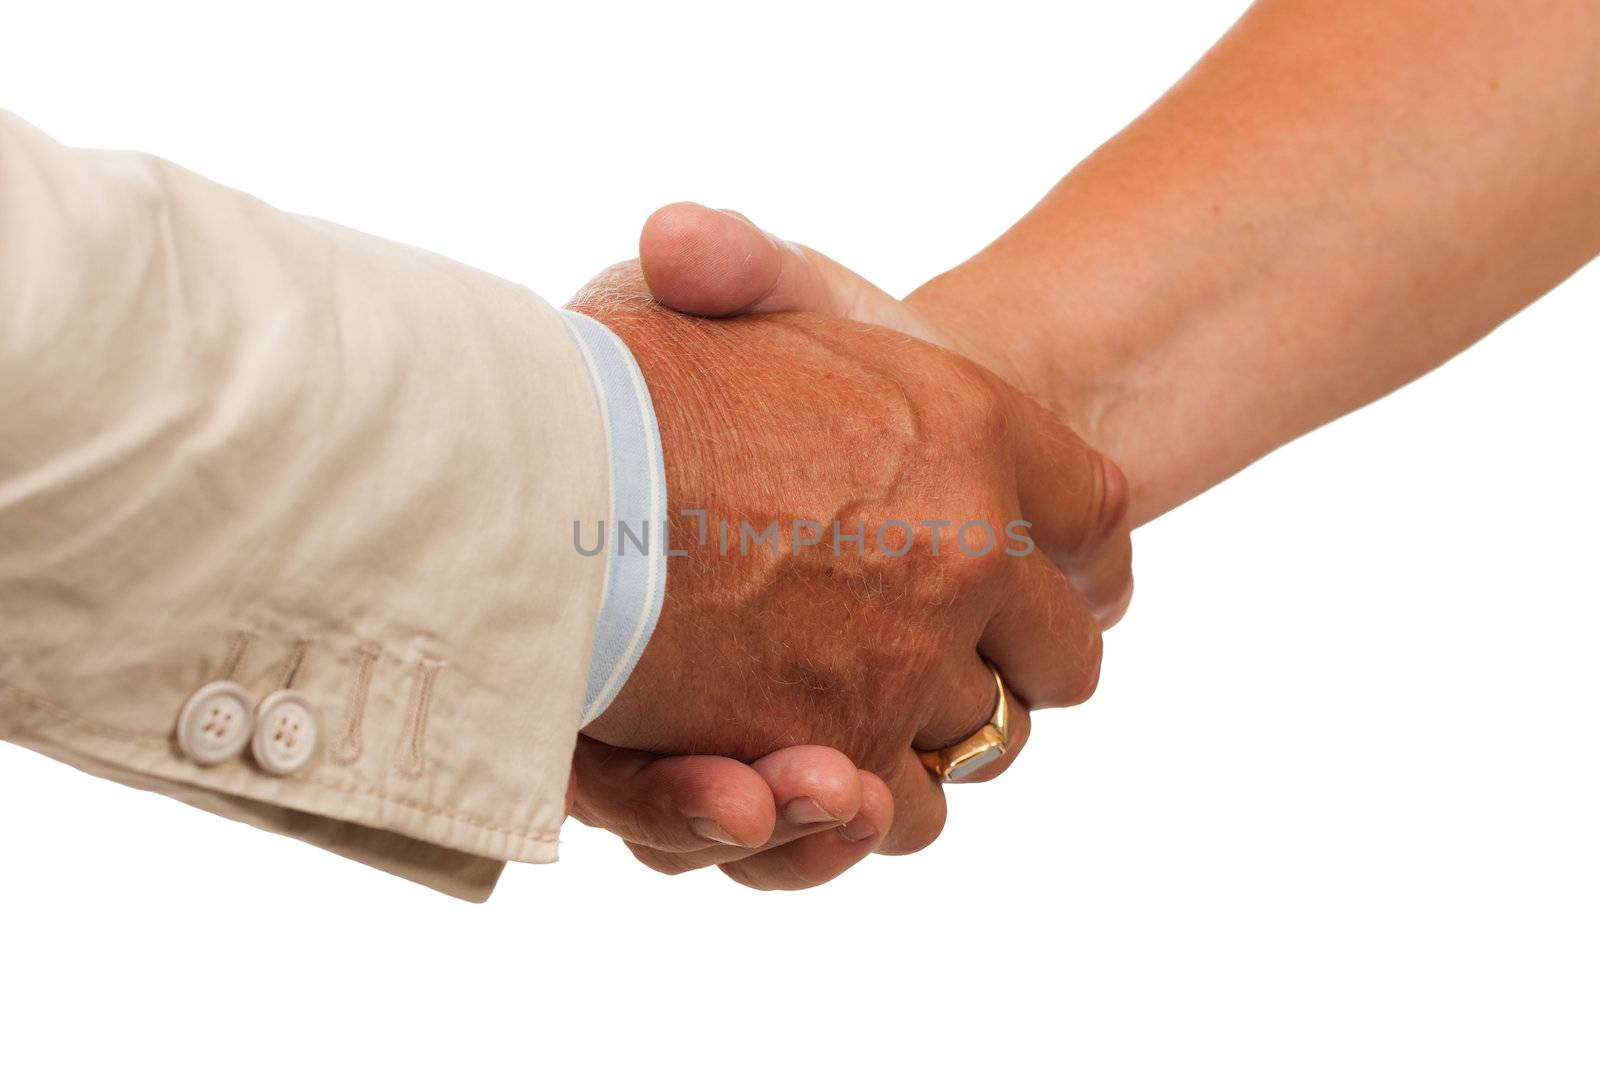 A hand shake between a man and woman. Isolated on white.